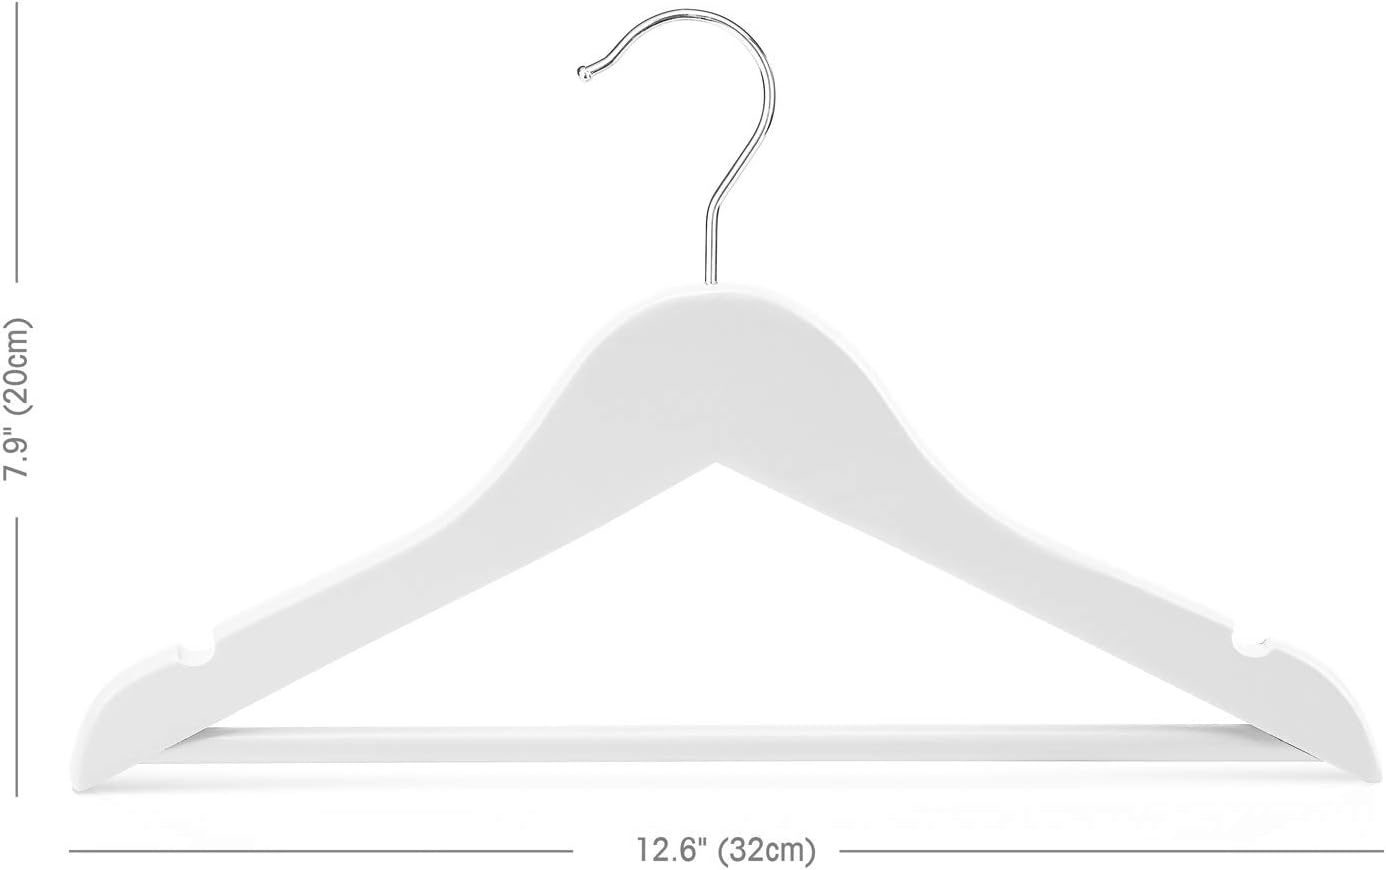 HOUSE DAY 12.6X7.9 Inch Wooden Childrens Hangers Kids Hangers White 20 Pack